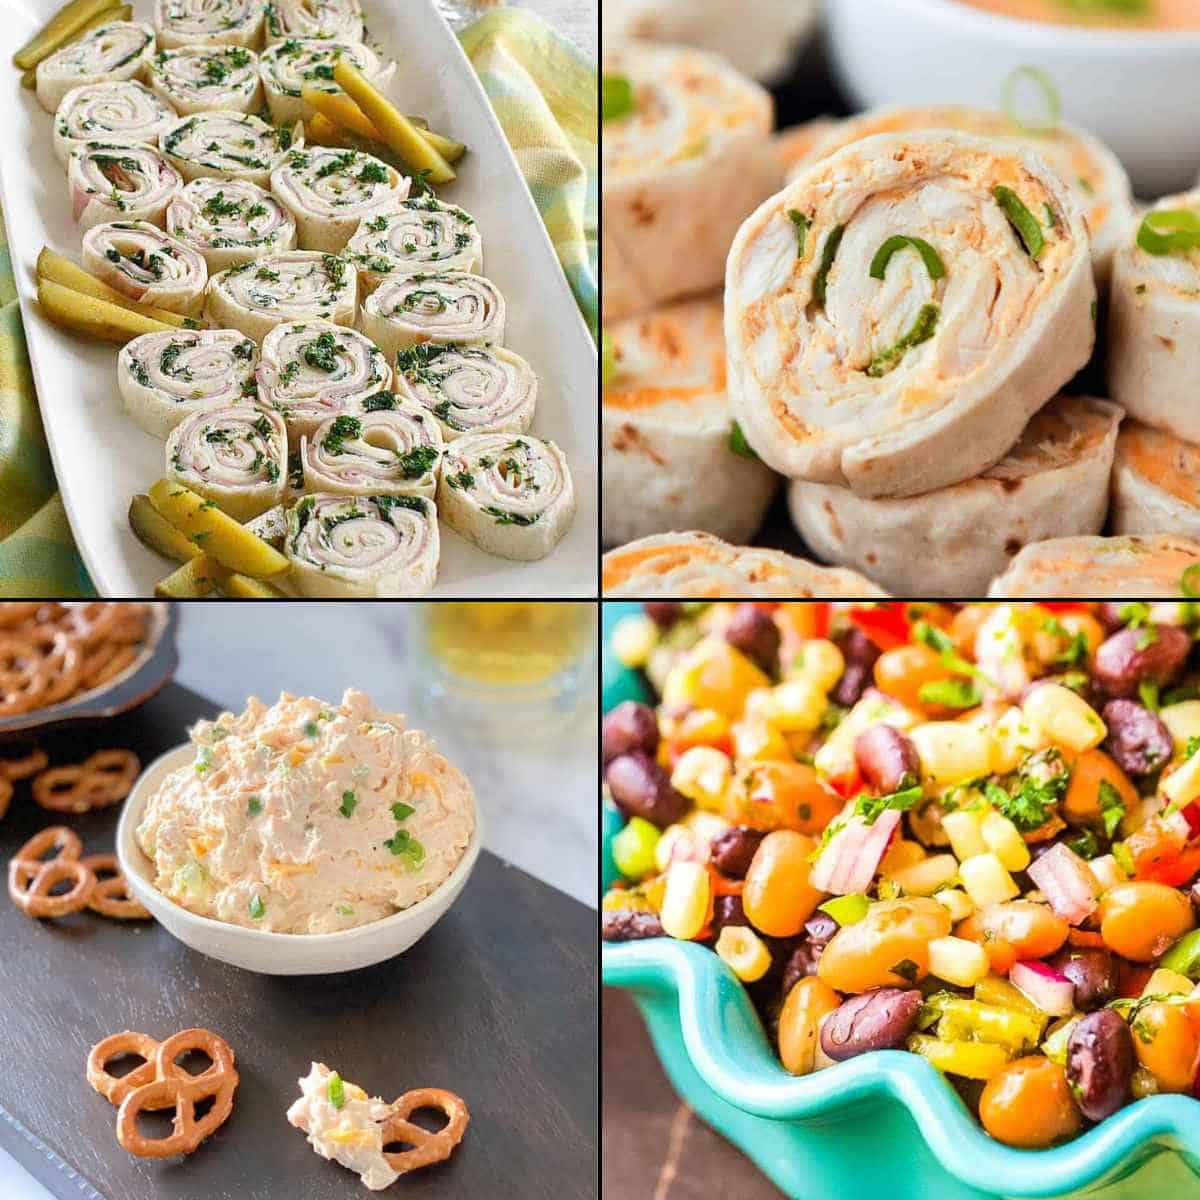 Game day cold appetizers: pinwheel sandwiches, cowboy caviar, and beer cheese dip